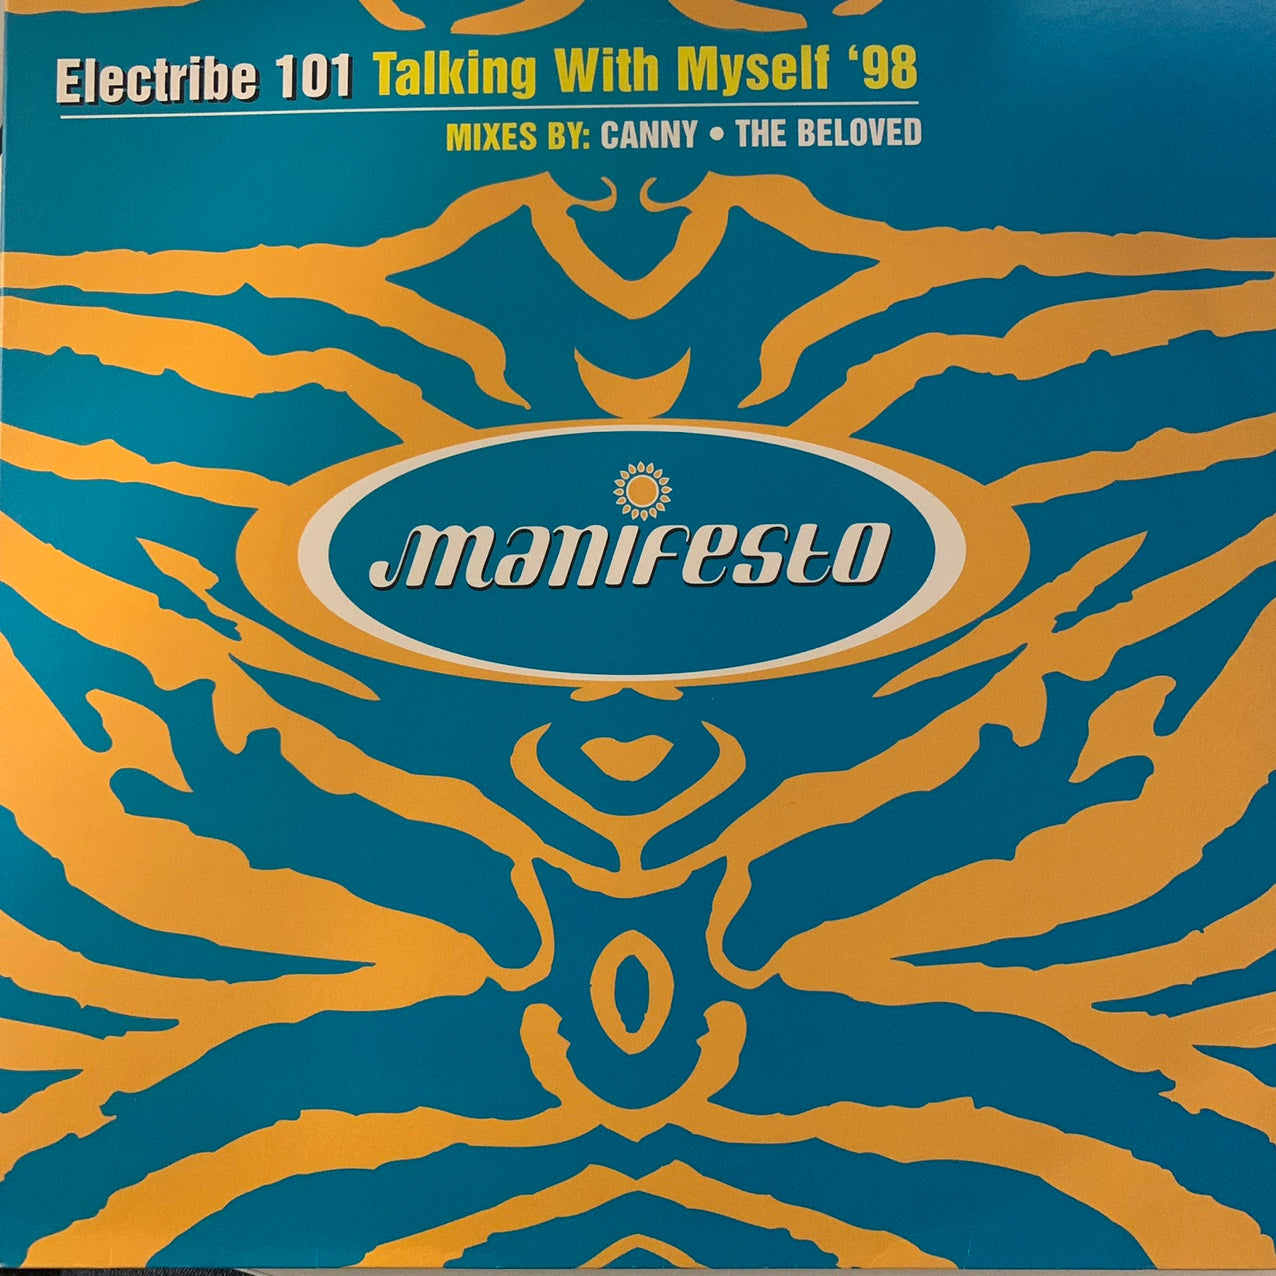 Electribe 101 “Talking With Myself” 98 2 version 12inch Vinyl, Featuring Canny 12” Vocal and Beloved Club Vocal